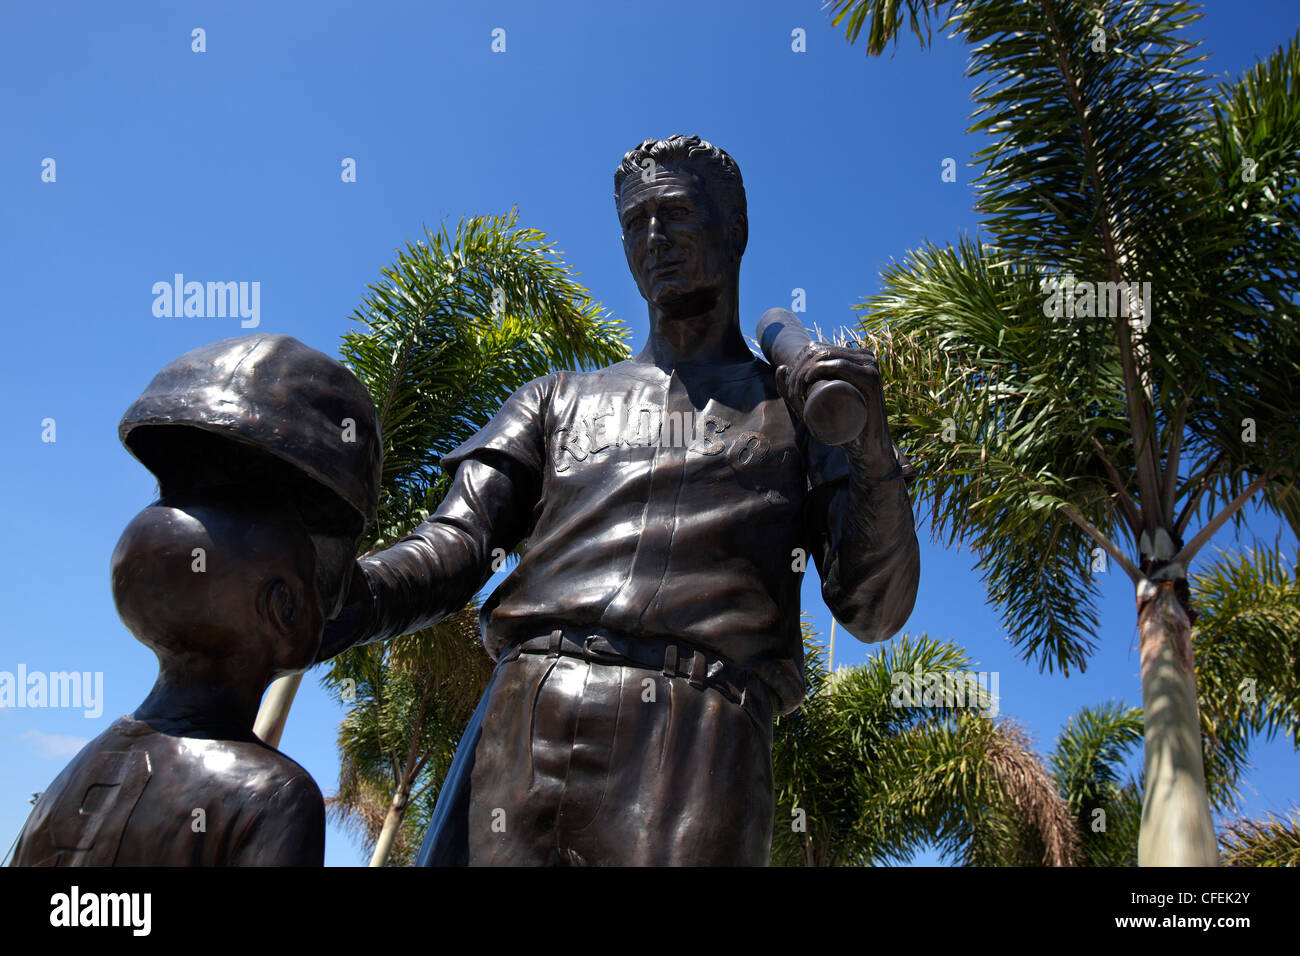 A statue of Ted Williams outside the Boston Red Sox's spring training camp at jetBlue Park in Fort Myers, Florida Stock Photo